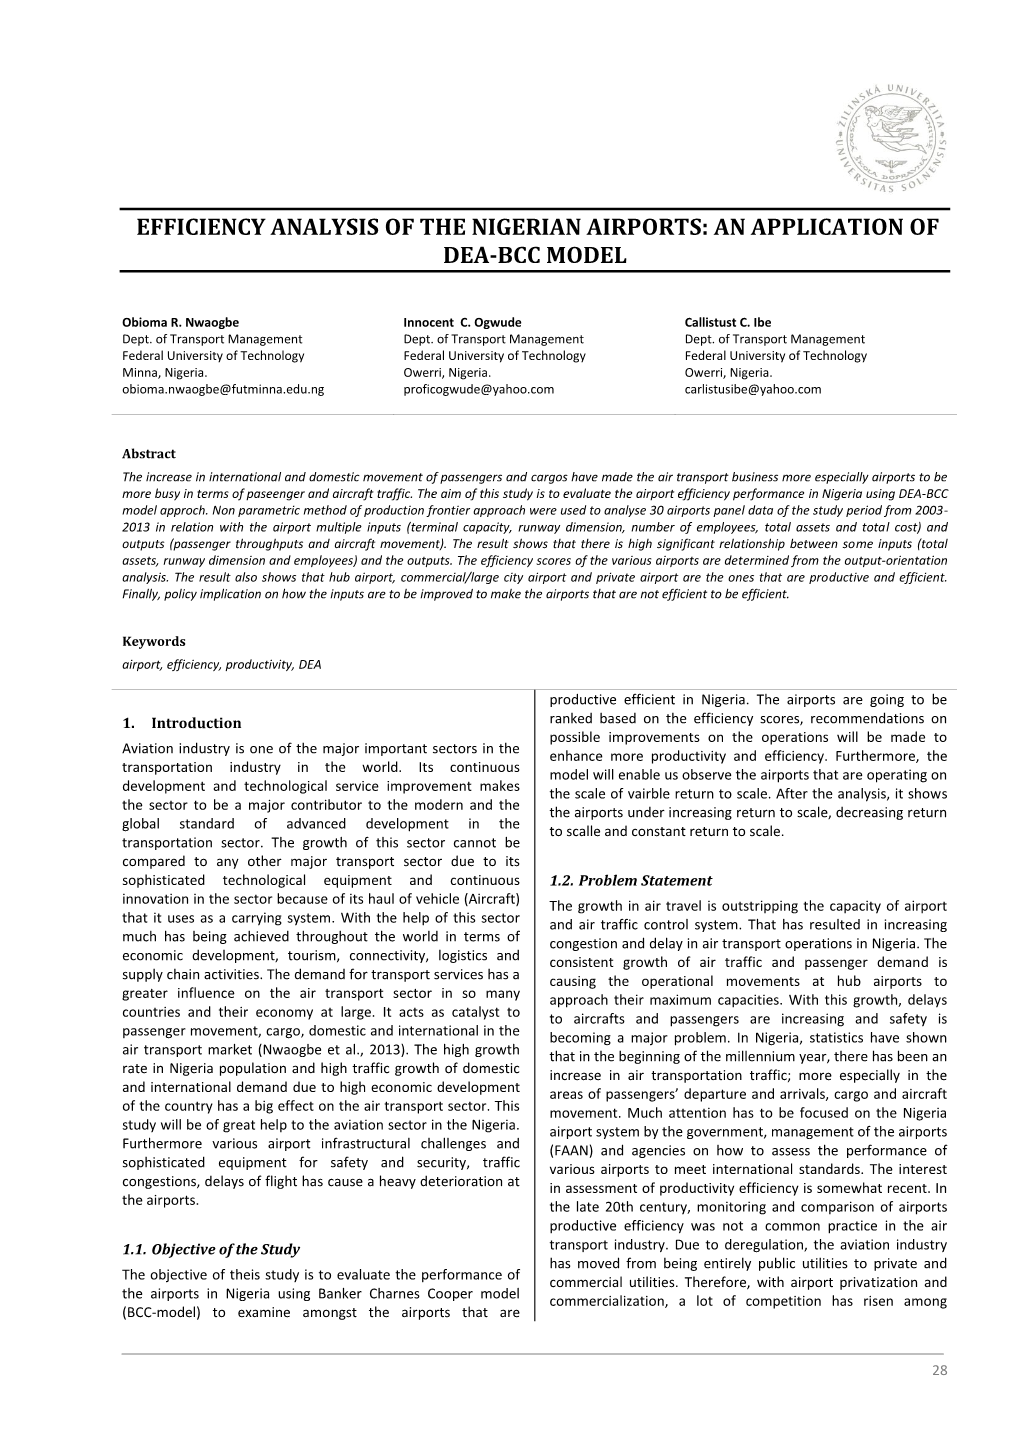 Efficiency Analysis of the Nigerian Airports: an Application of Dea-Bcc Model